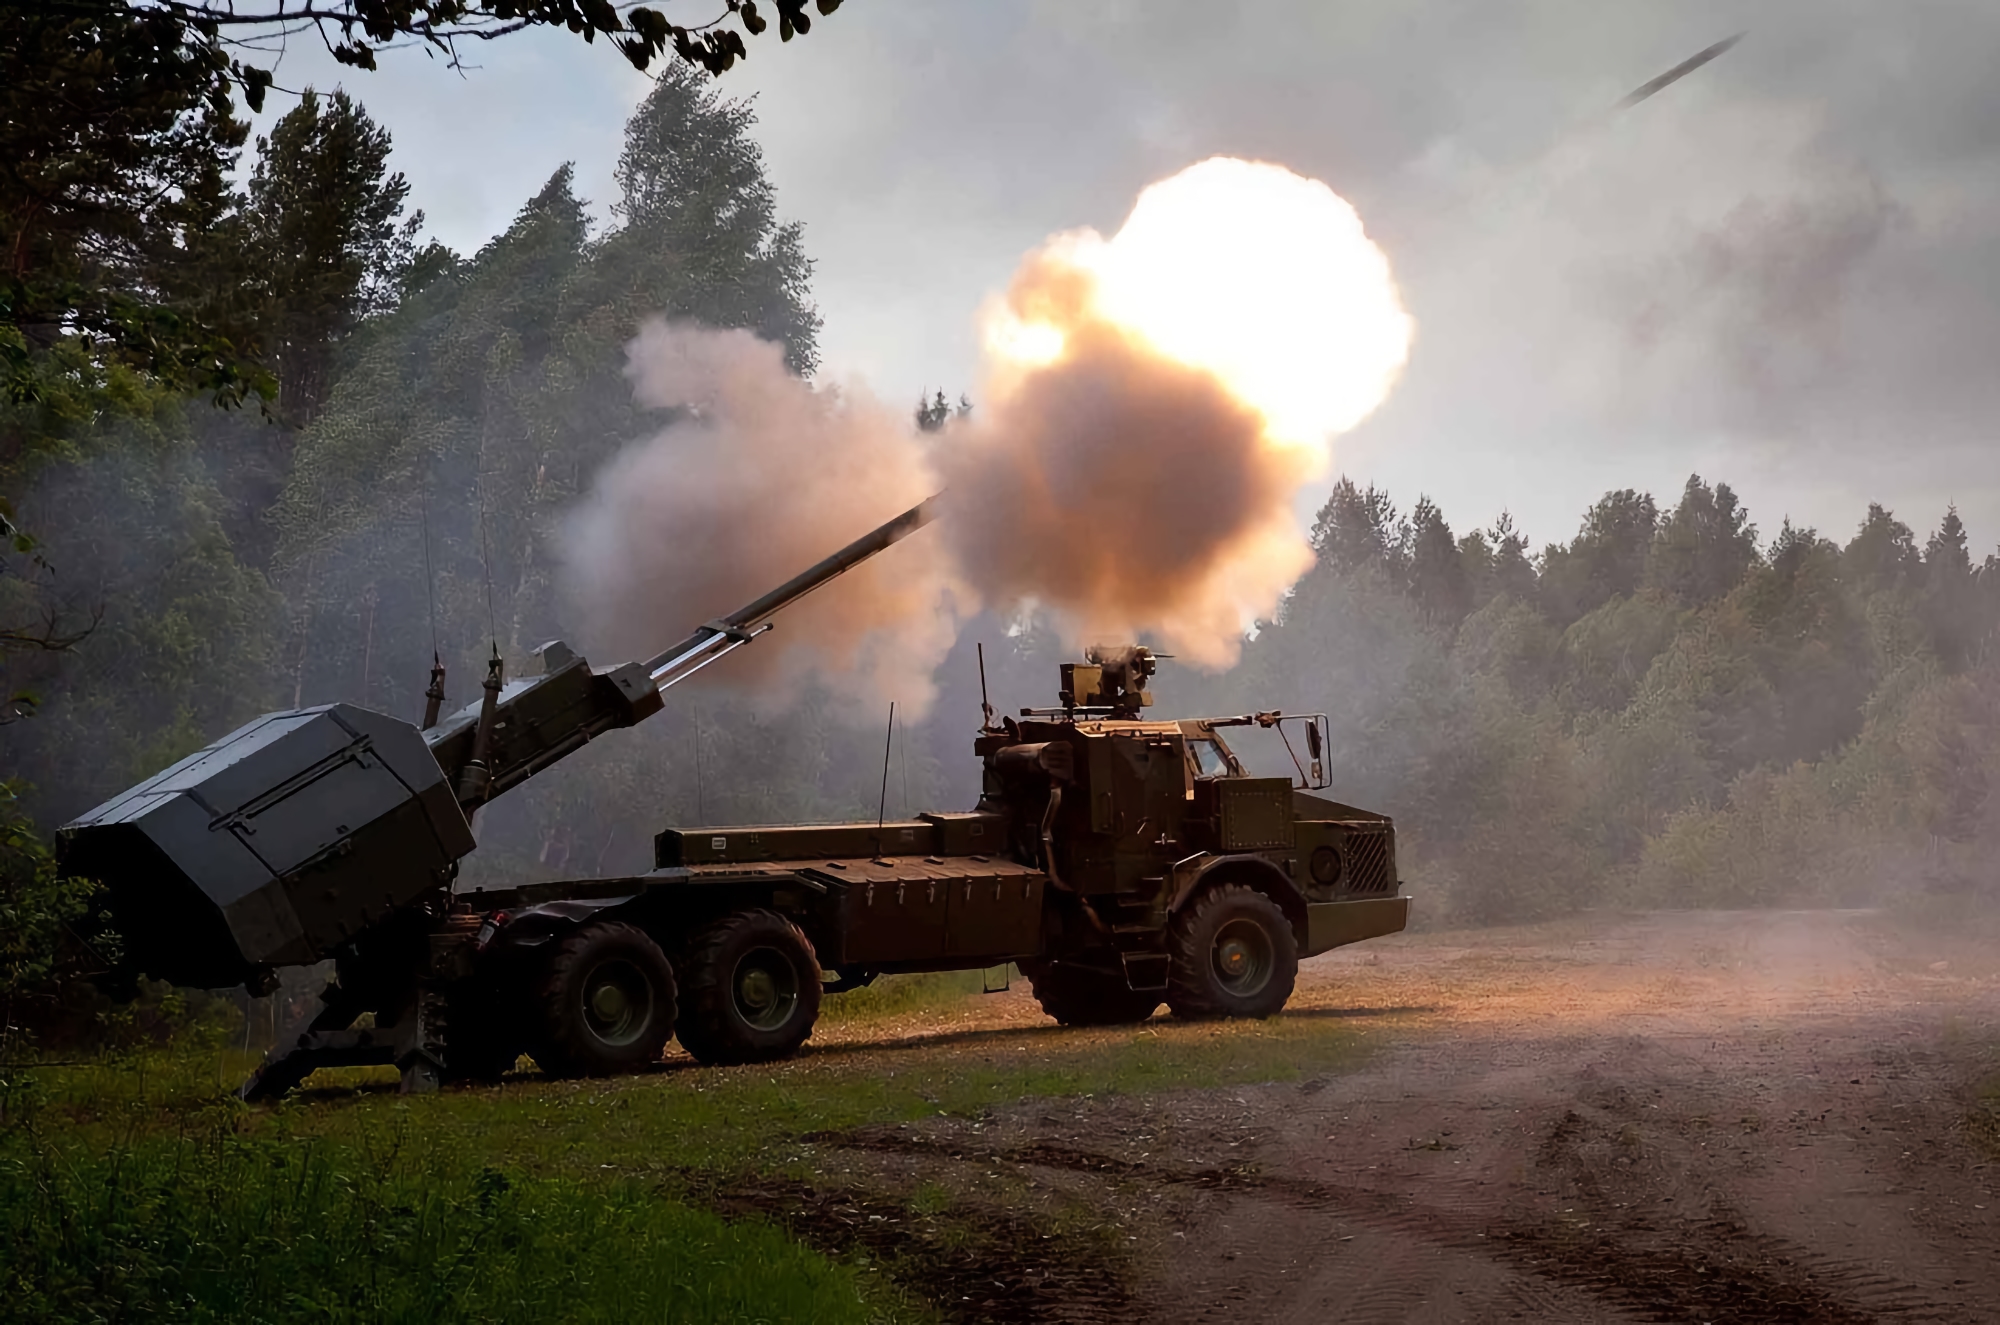 Sweden considers transferring Archer SAMs and RBS 70 man-portable air defense systems to Ukraine